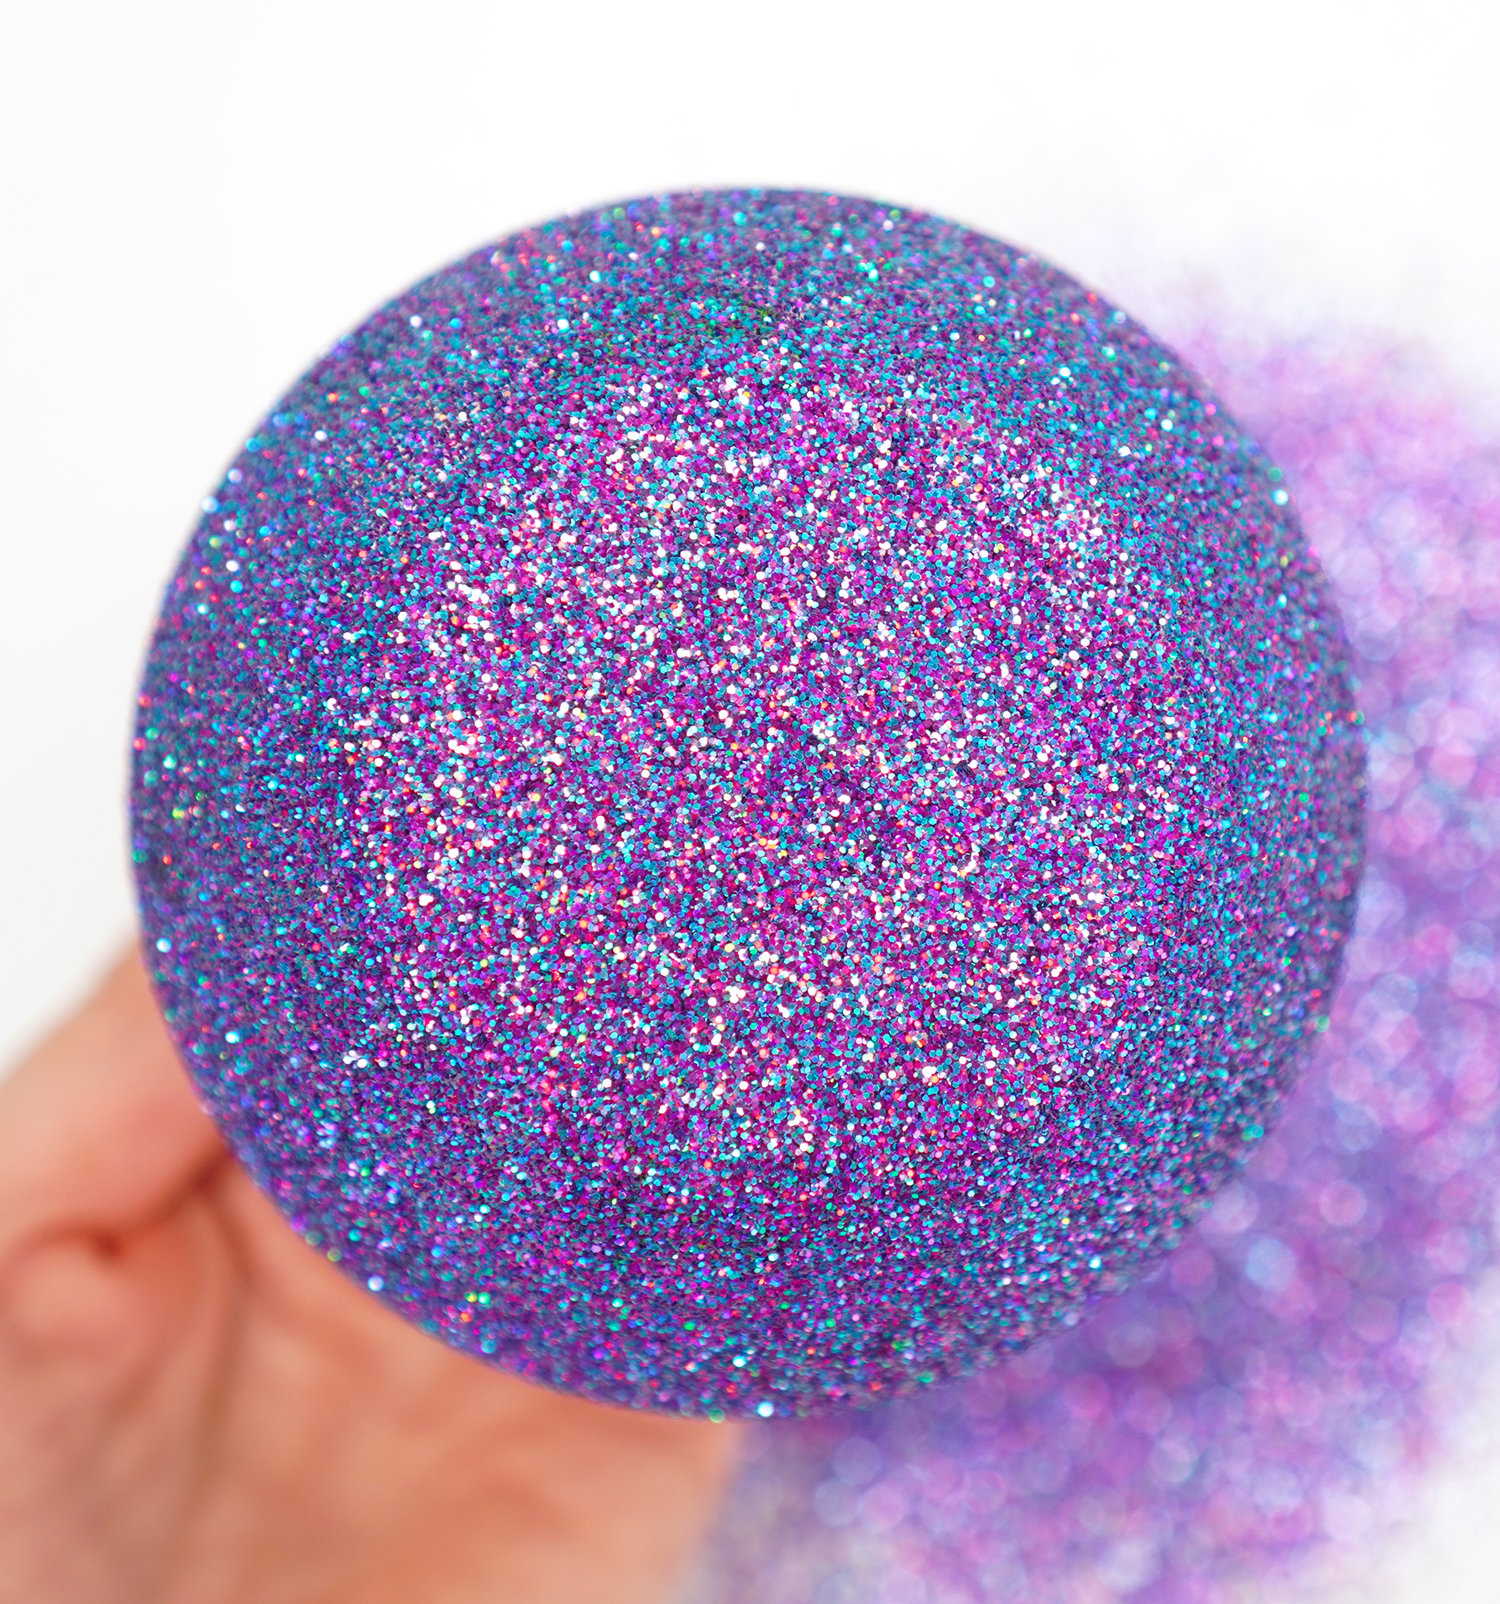 Close up of bottom of wine glass covered in multi-hued purple glitter with shades of fuchsia and turquoise